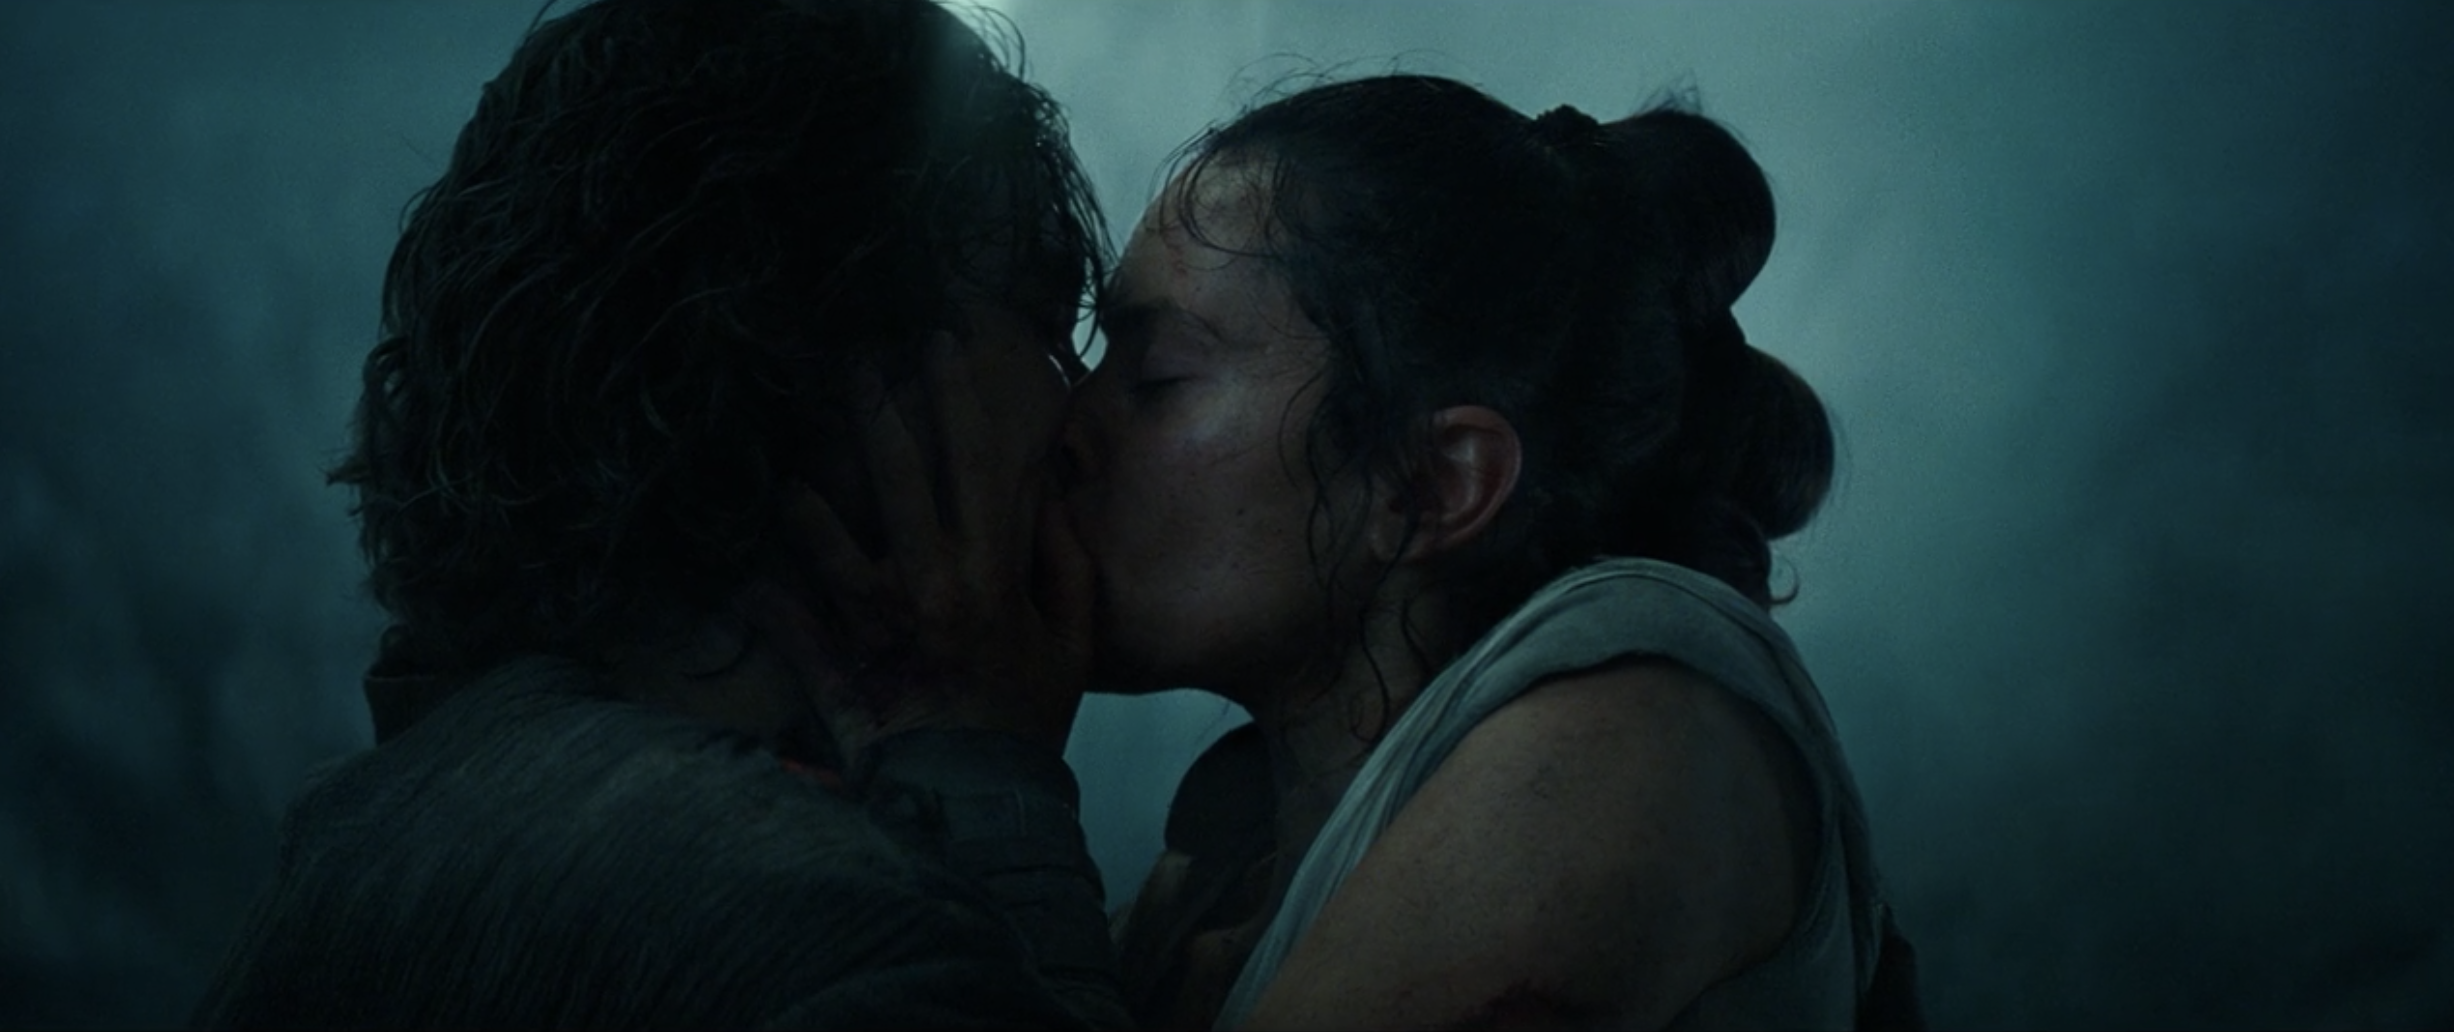 Kylo Ren and Rey kissing